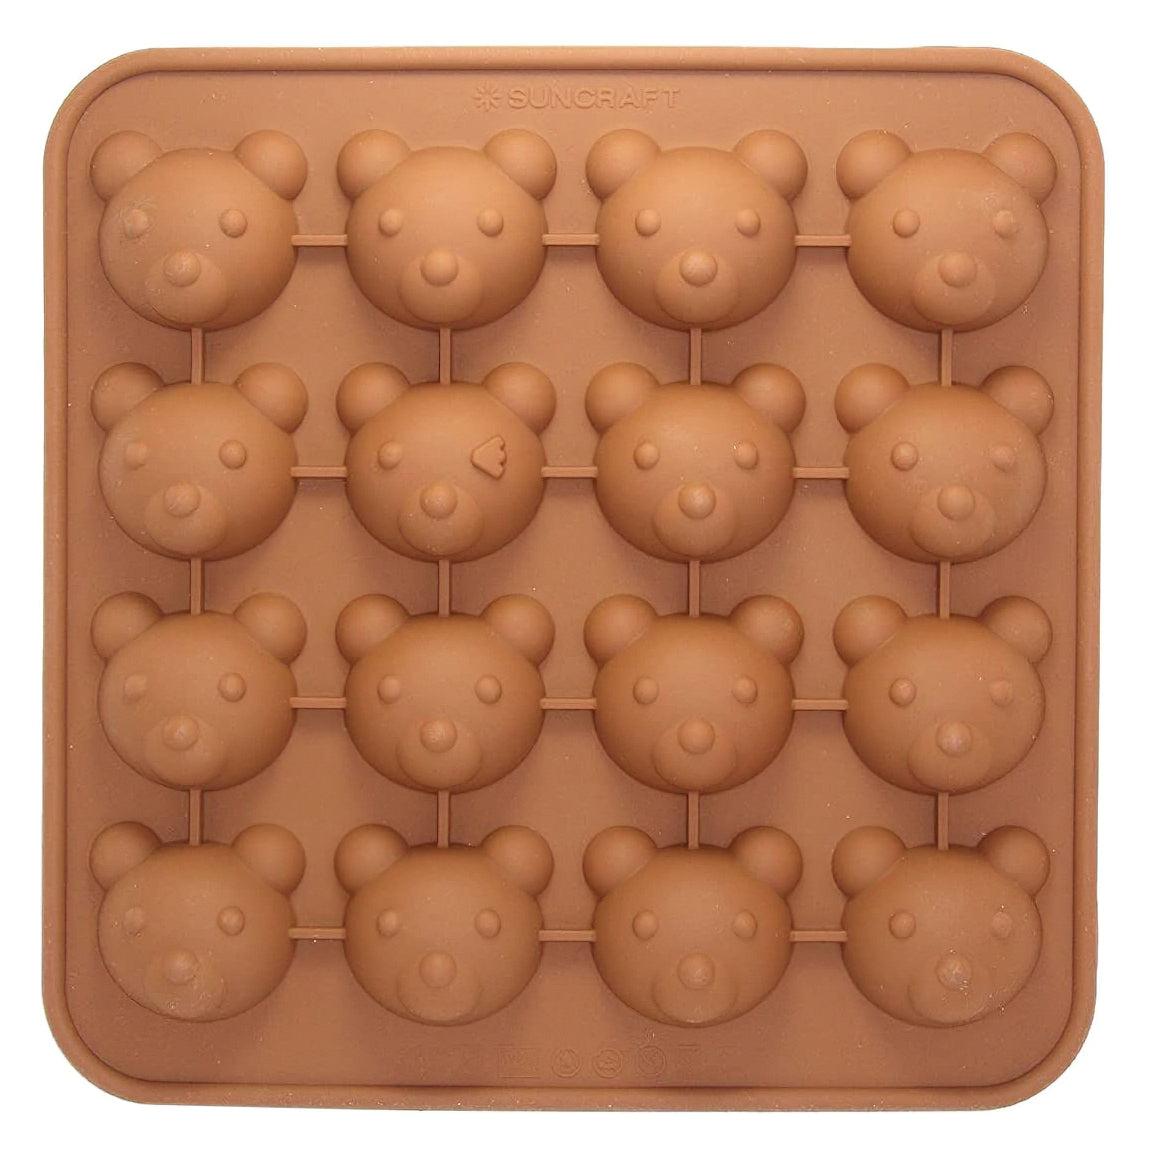 SUNCRAFT Silicone Rubber Bear Chocolate Mold